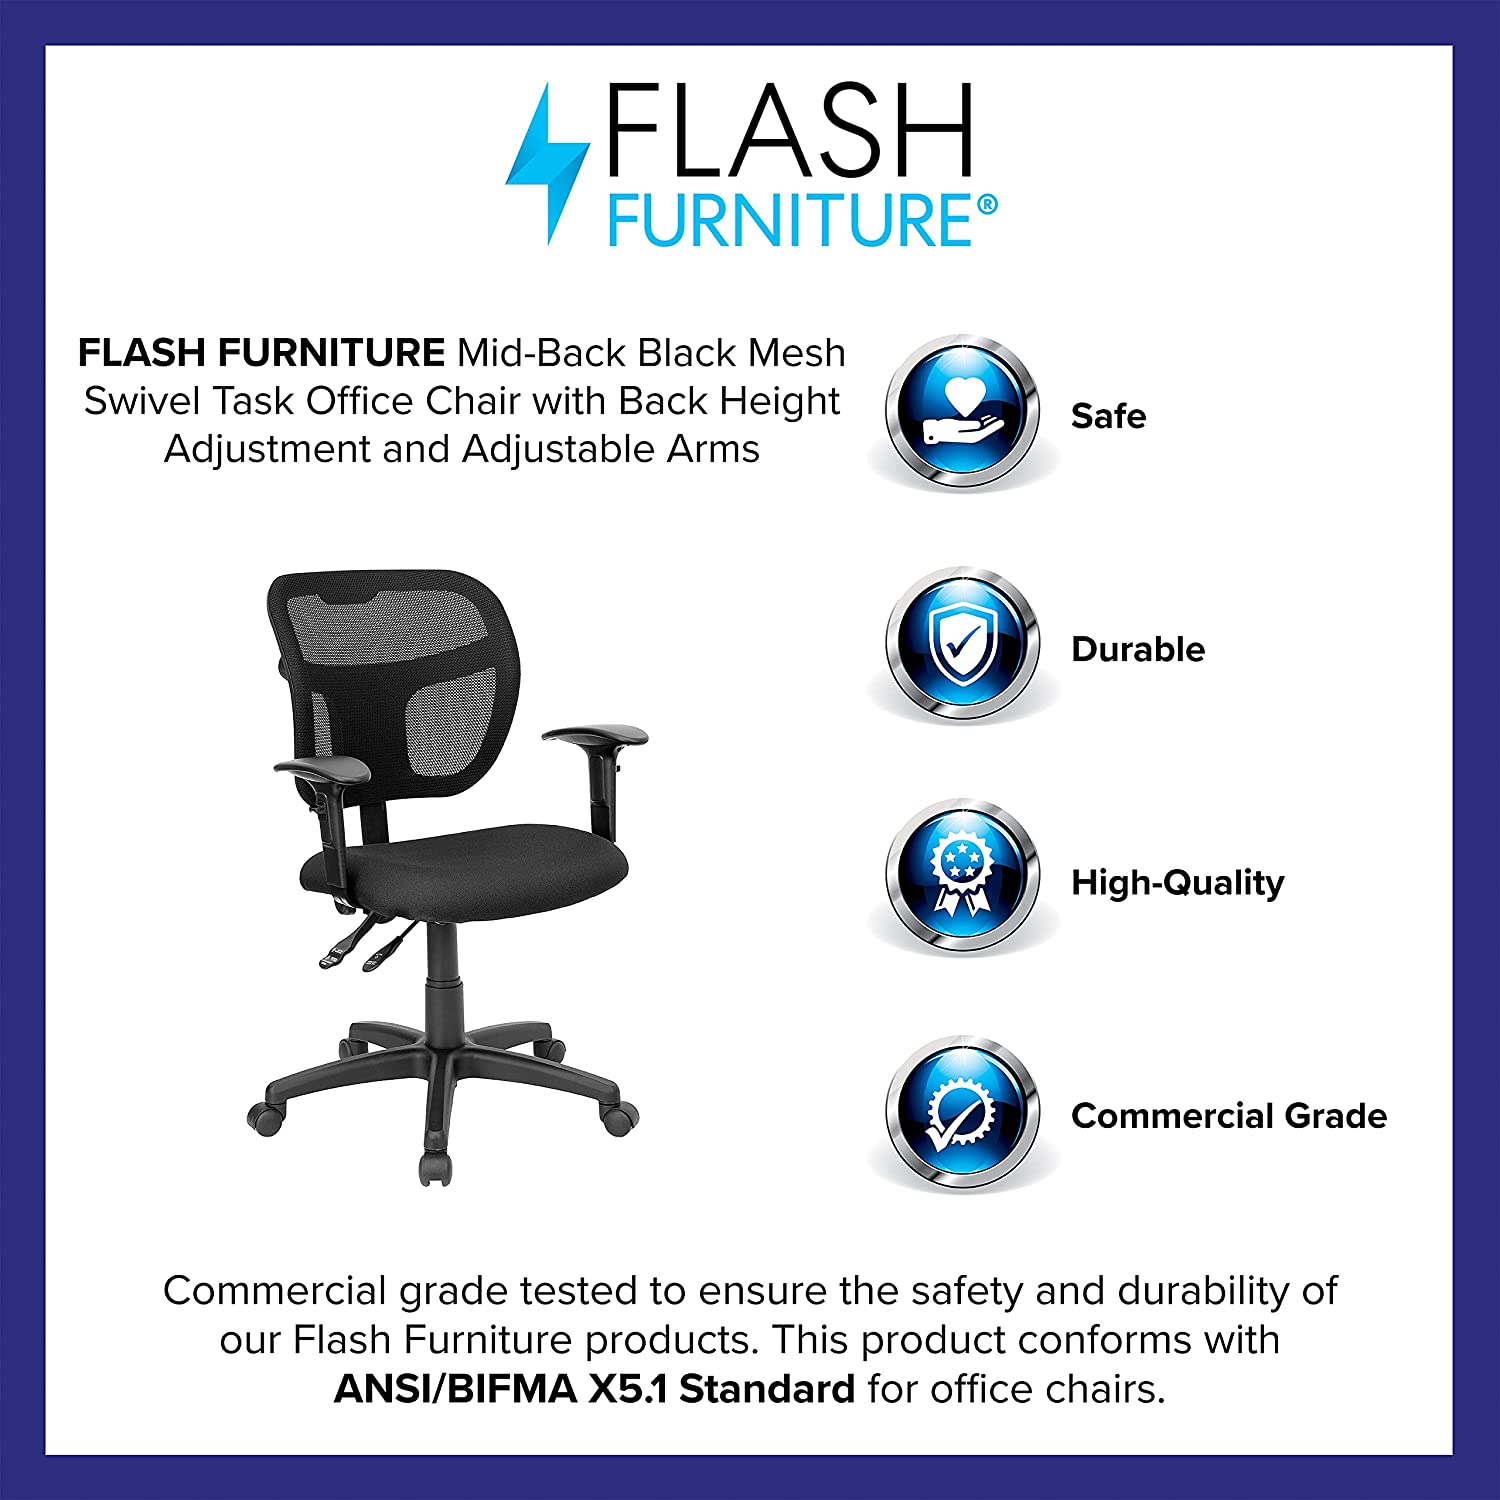 Flash Furniture Mid-Back Black Mesh Swivel Task Office Chair with Back Height Adjustment and Adjustable Arms